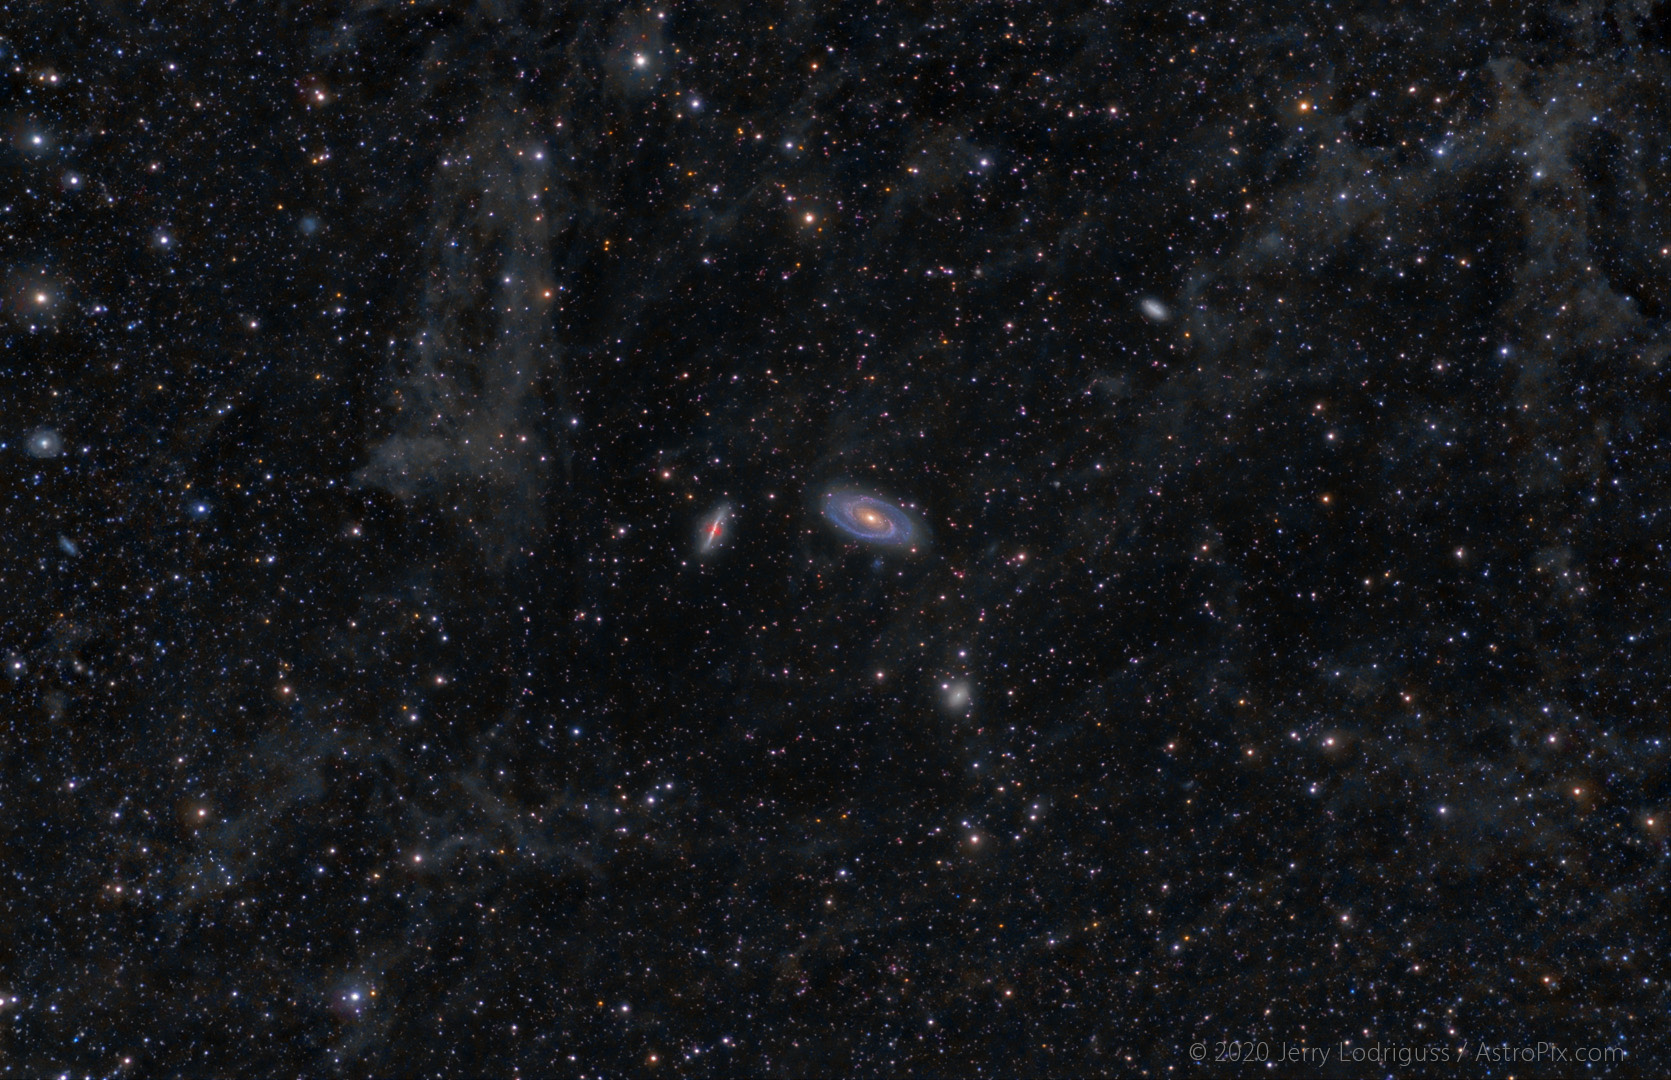 Galaxies M81, M82 are seen through the extrememly faint Integrated Flux Nebula in Ursa Major. This is 28 hours total exposure (my personal record) at f/2.8 from MPASS 20.5 skies.